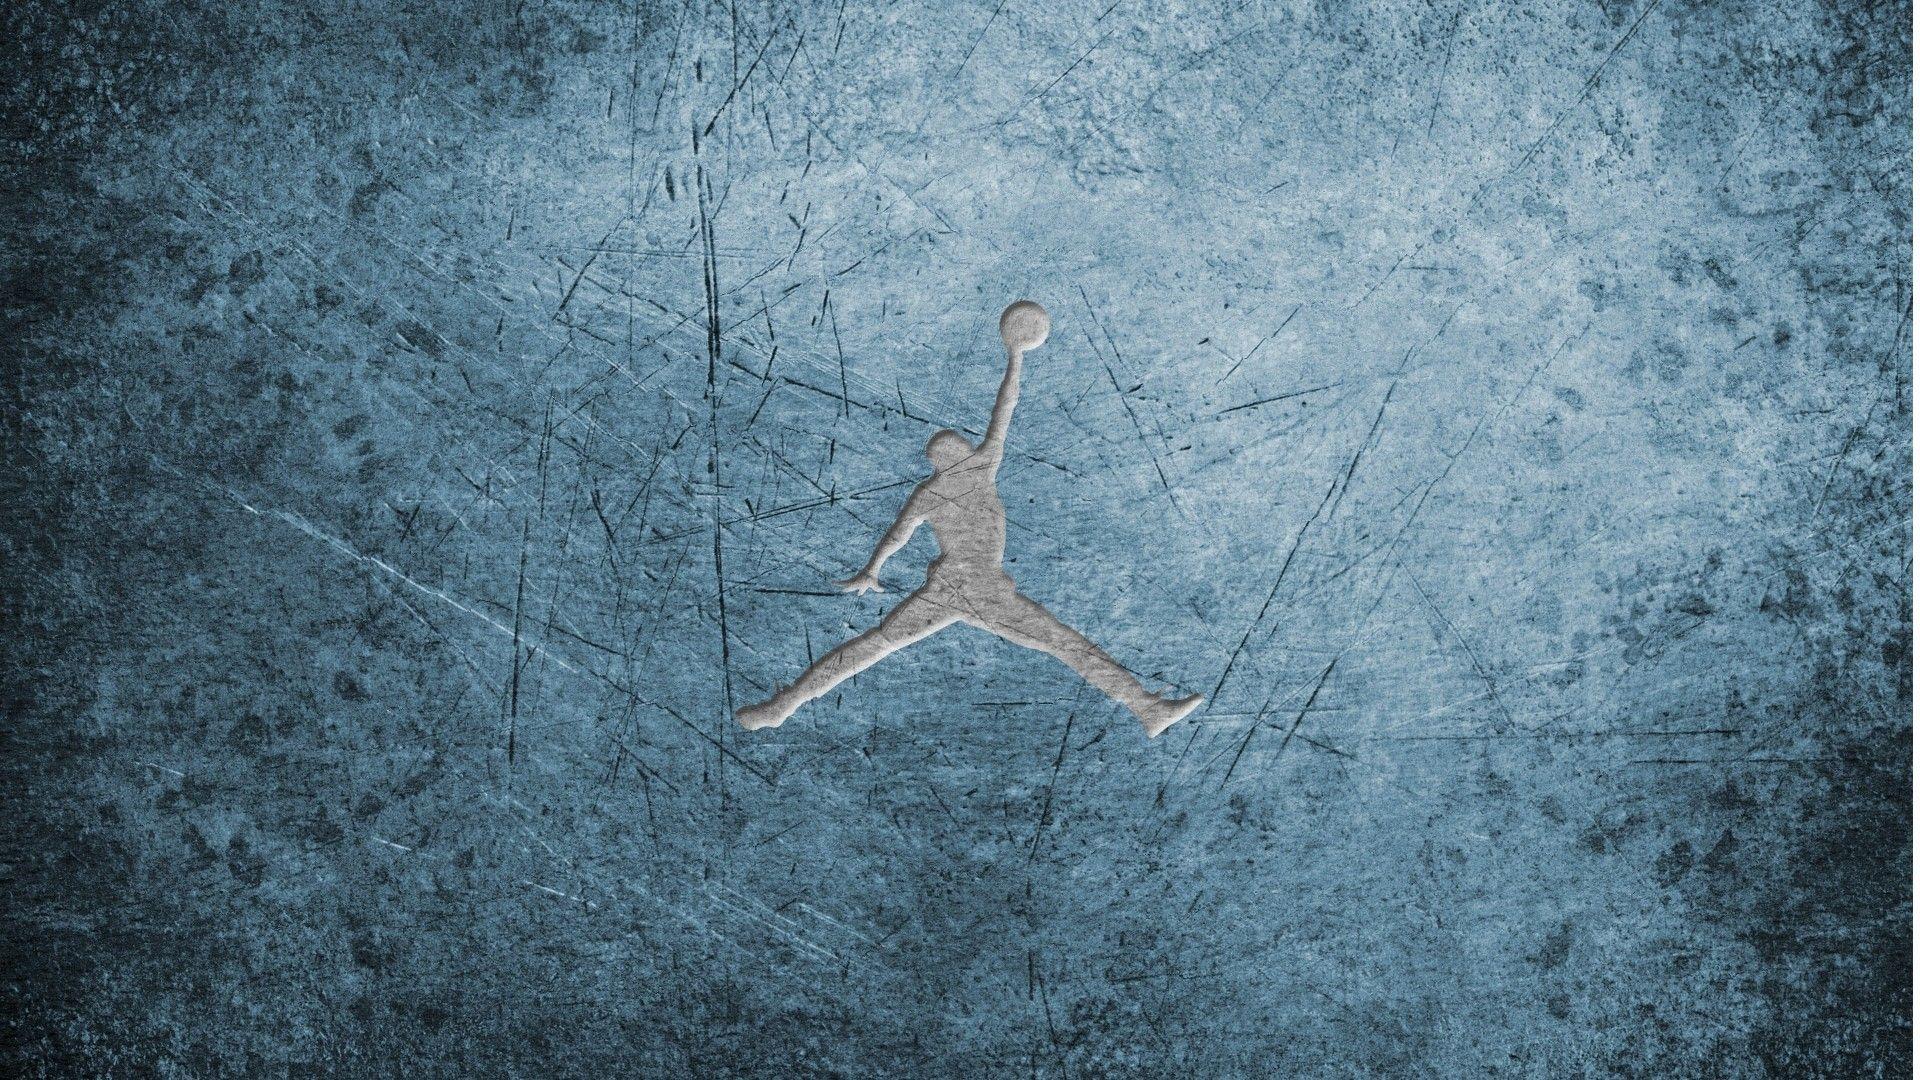 Jumpman wallpaper for android